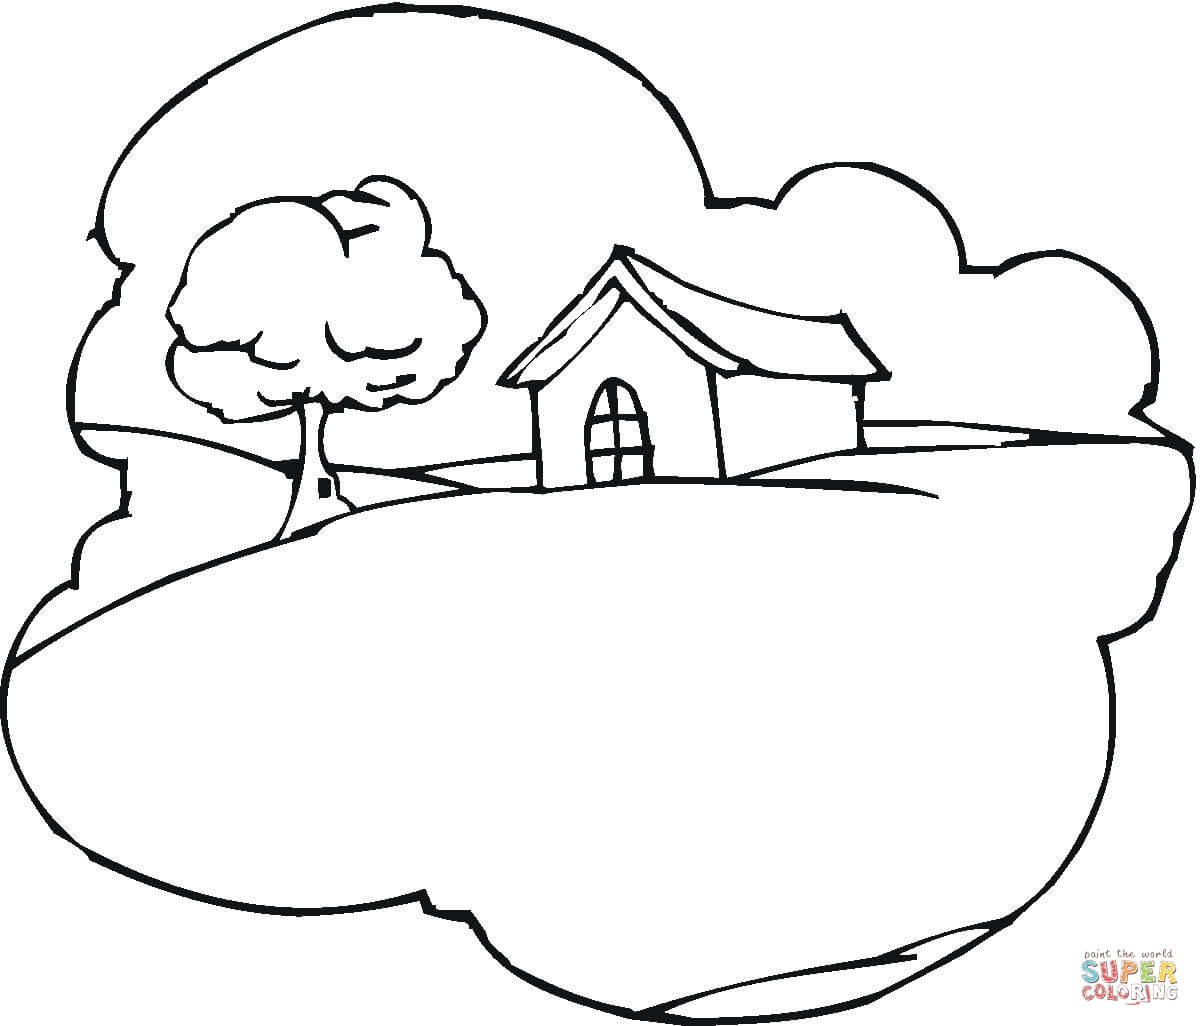 Cottage On The Hill coloring page | Free Printable Coloring Pages